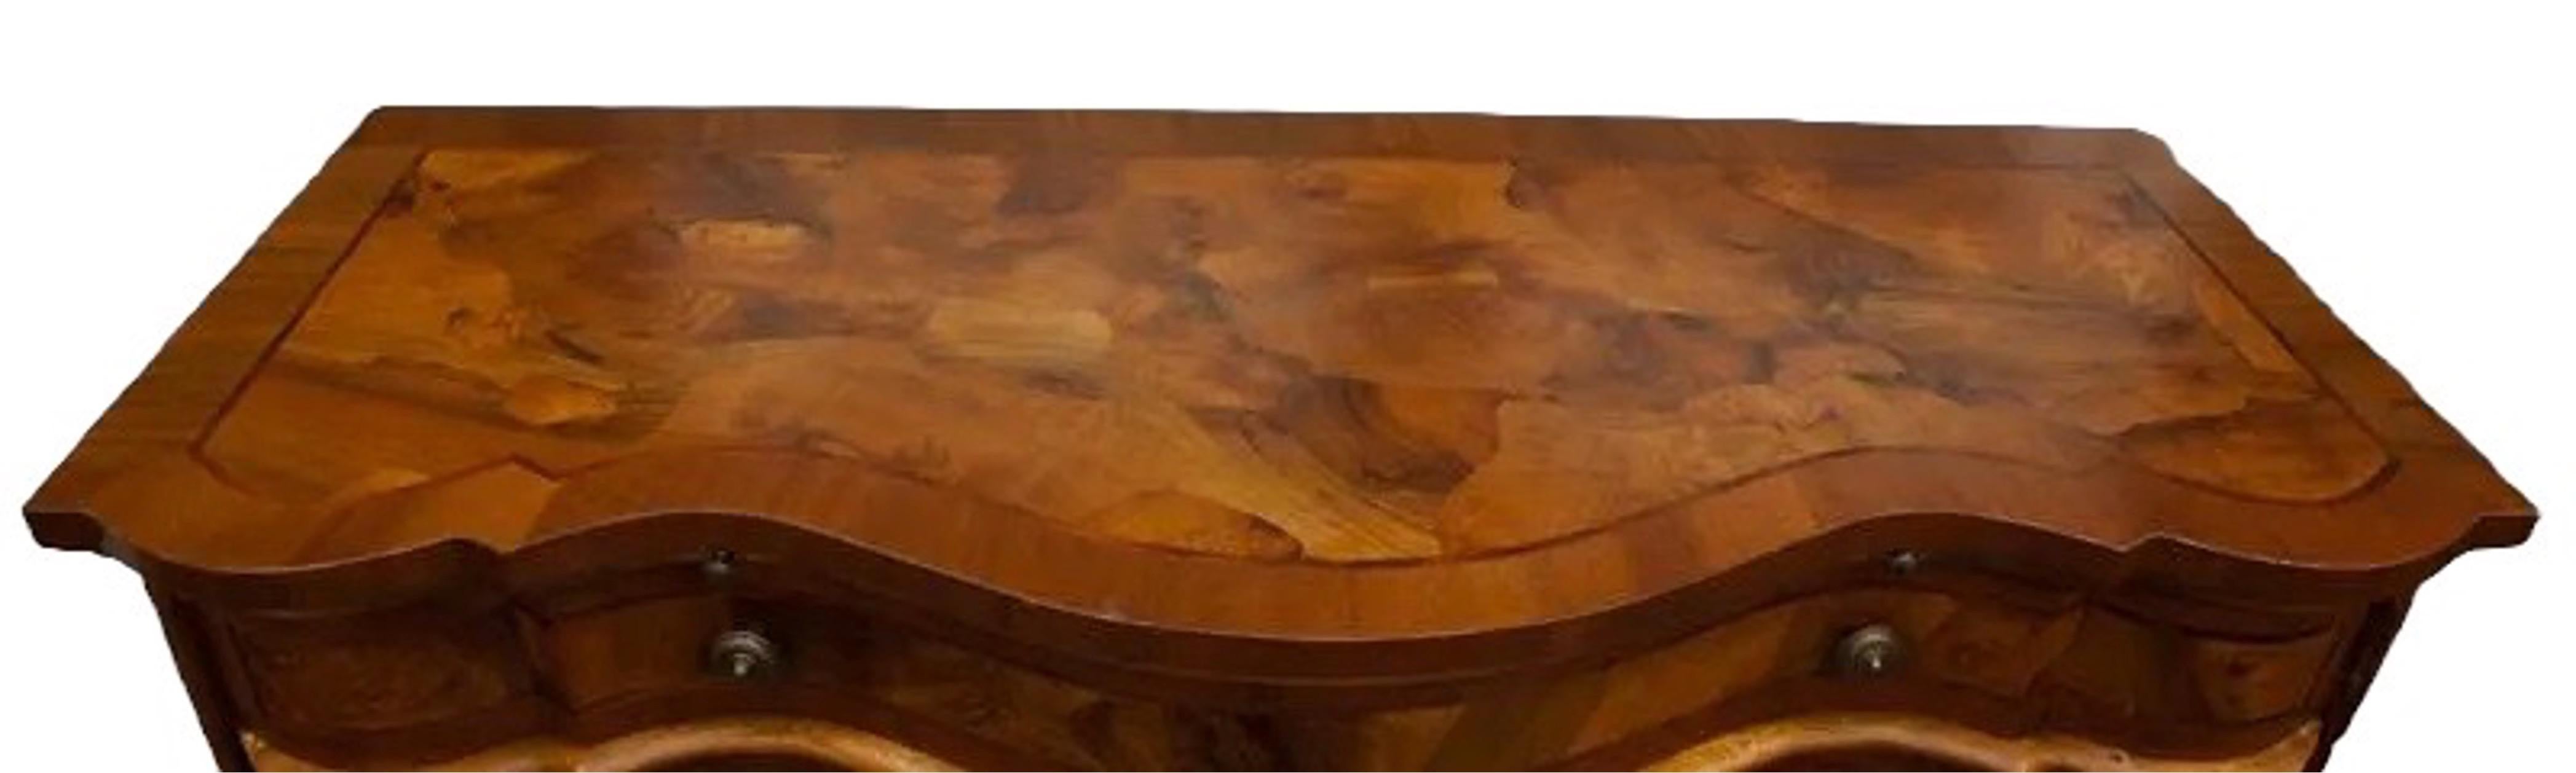 Circa 1750s German Oxbow Shaped Walnut Commode For Sale 7